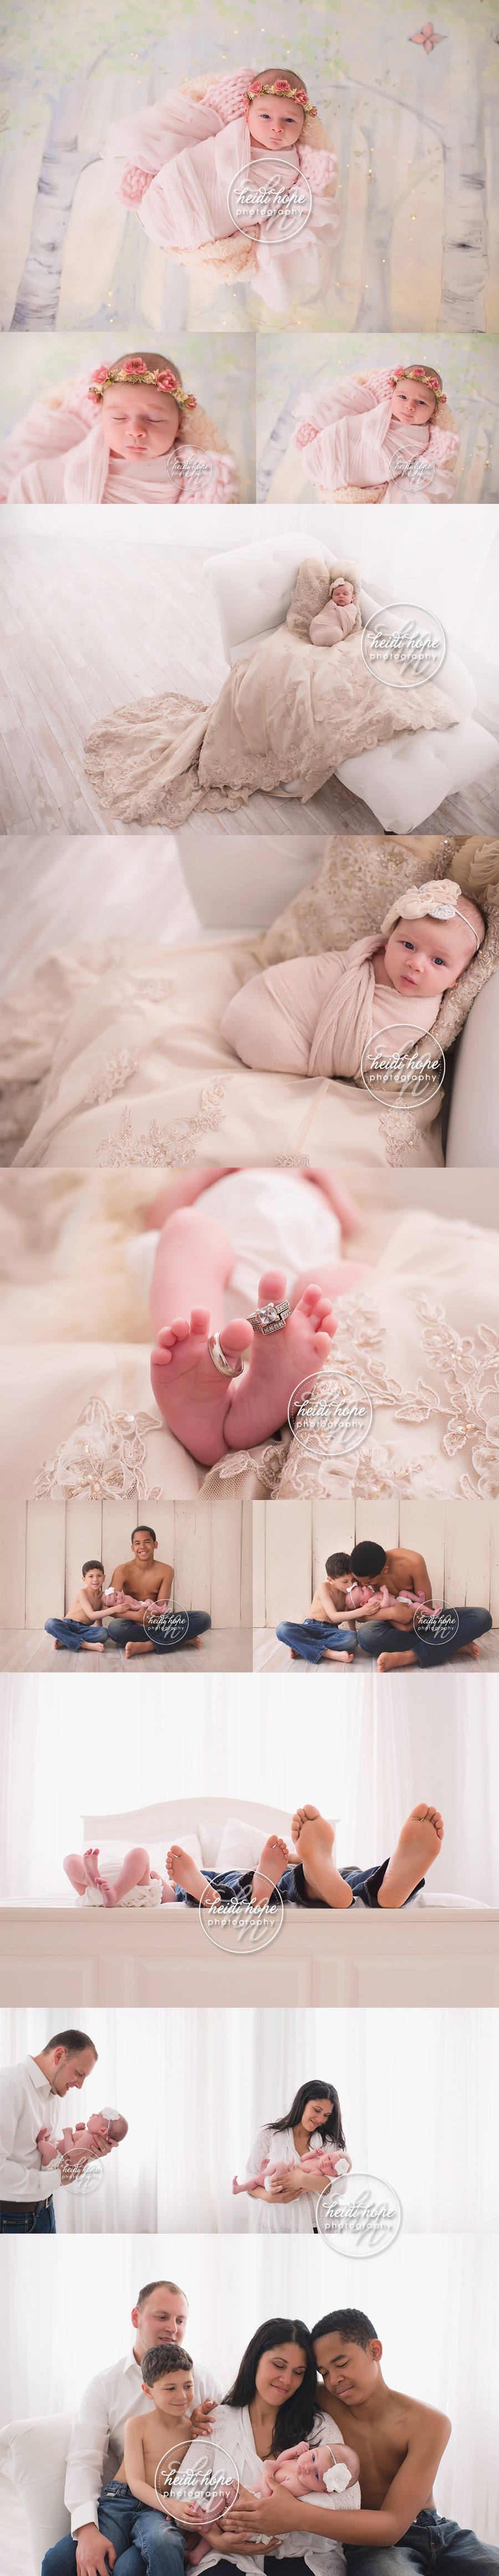 one-month-old-baby-girl-on-mom's-wedding-dress-portraits